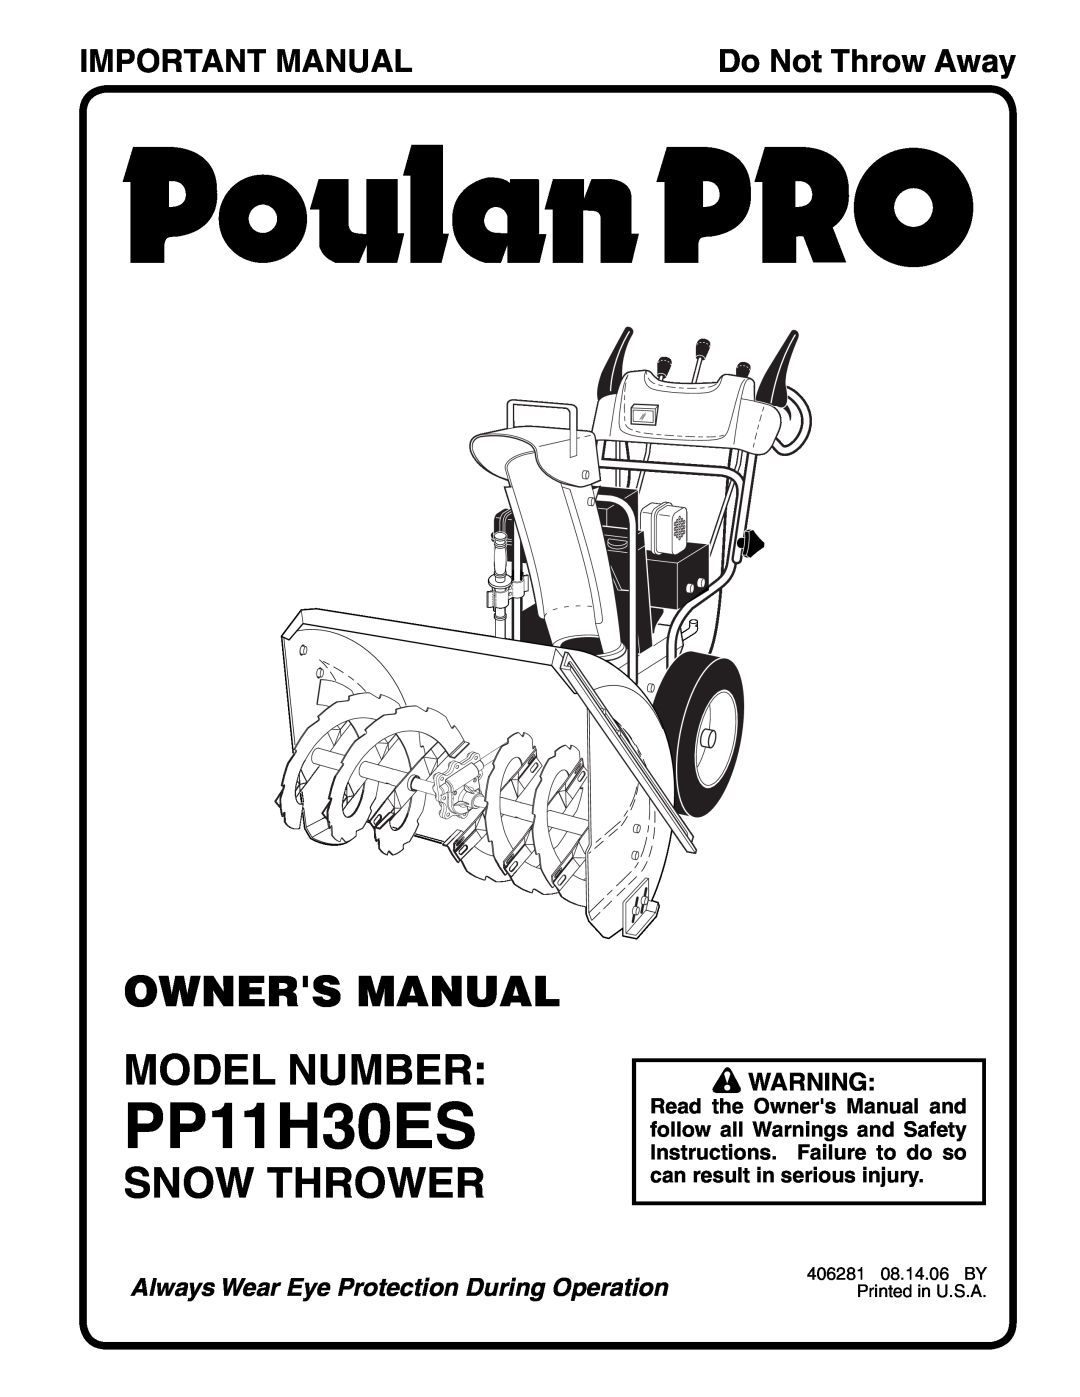 Poulan 406281 owner manual Owners Manual Model Number, Snow Thrower, Important Manual, PP11H30ES, Do Not Throw Away 